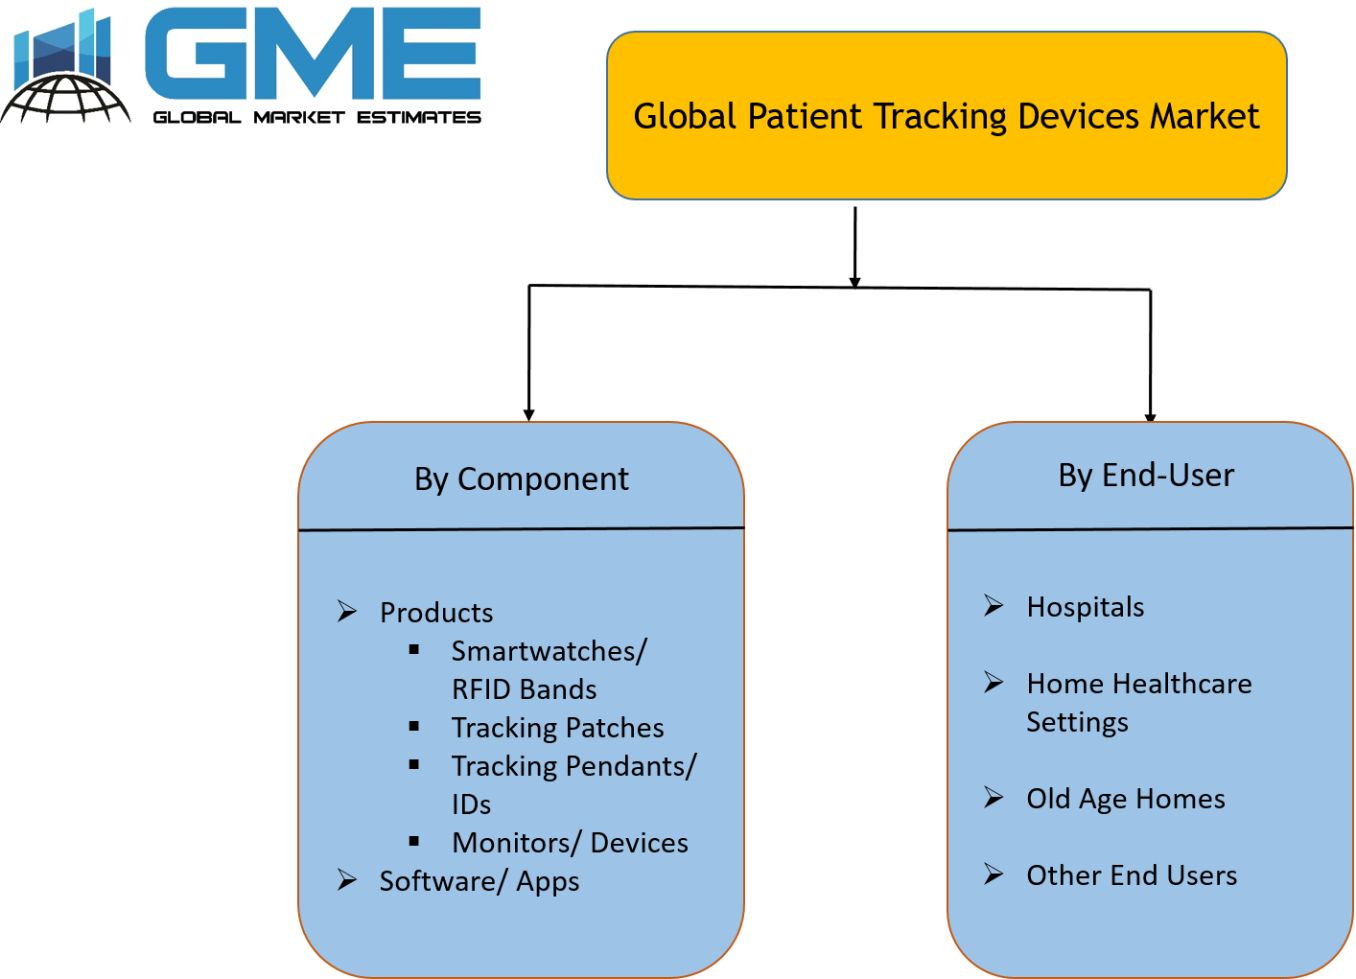 Global Patient Tracking Devices Market Segmentation